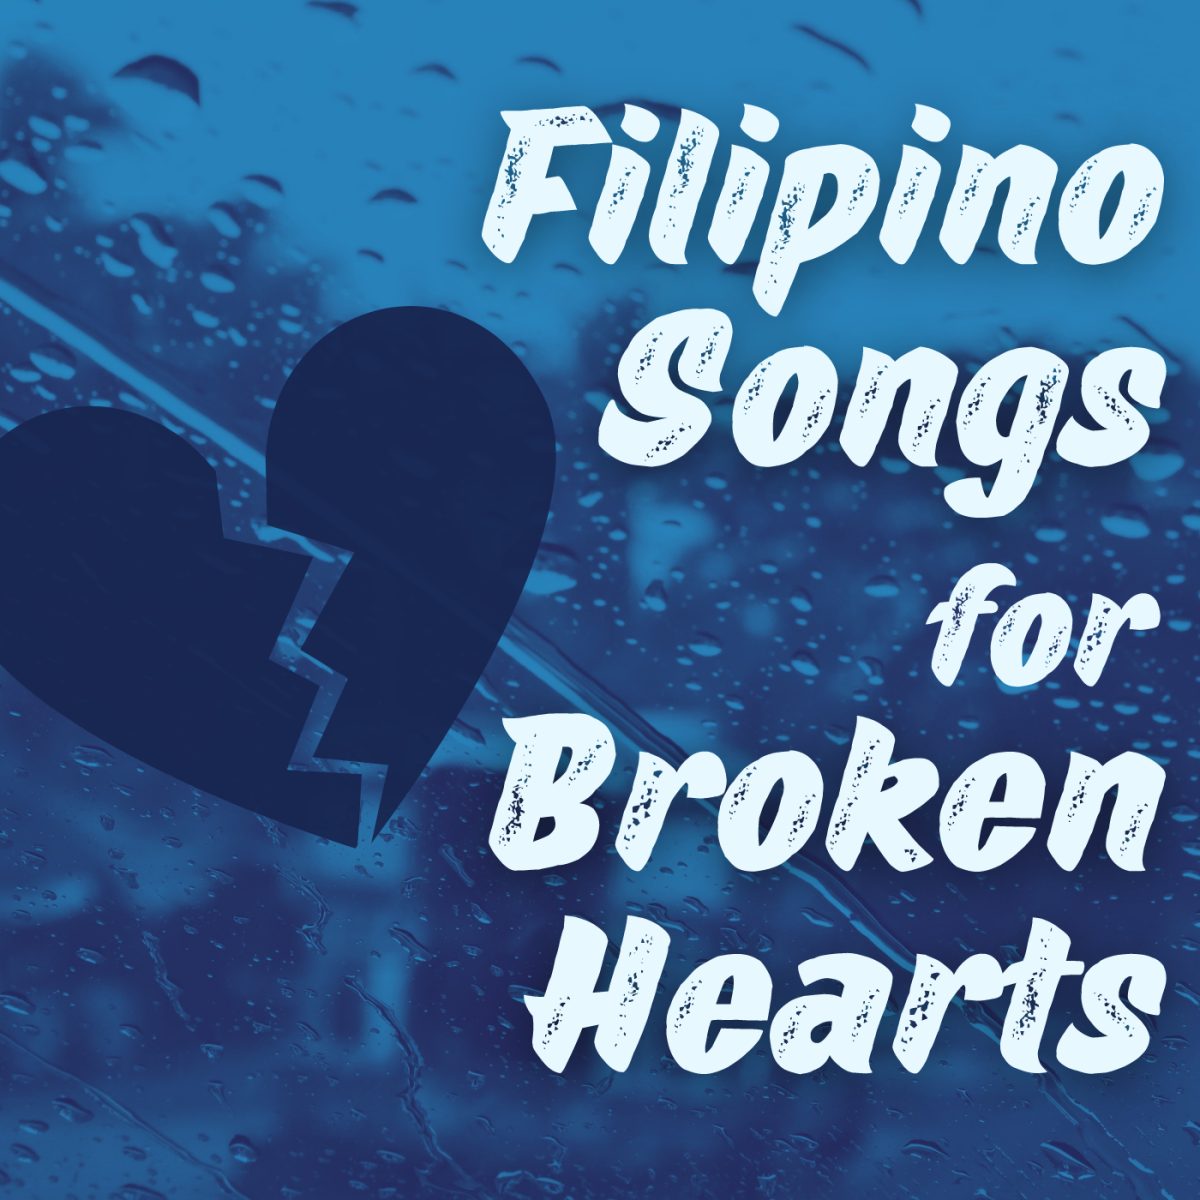 Listen to these sad OPM love songs when you're trying to get over a breakup.